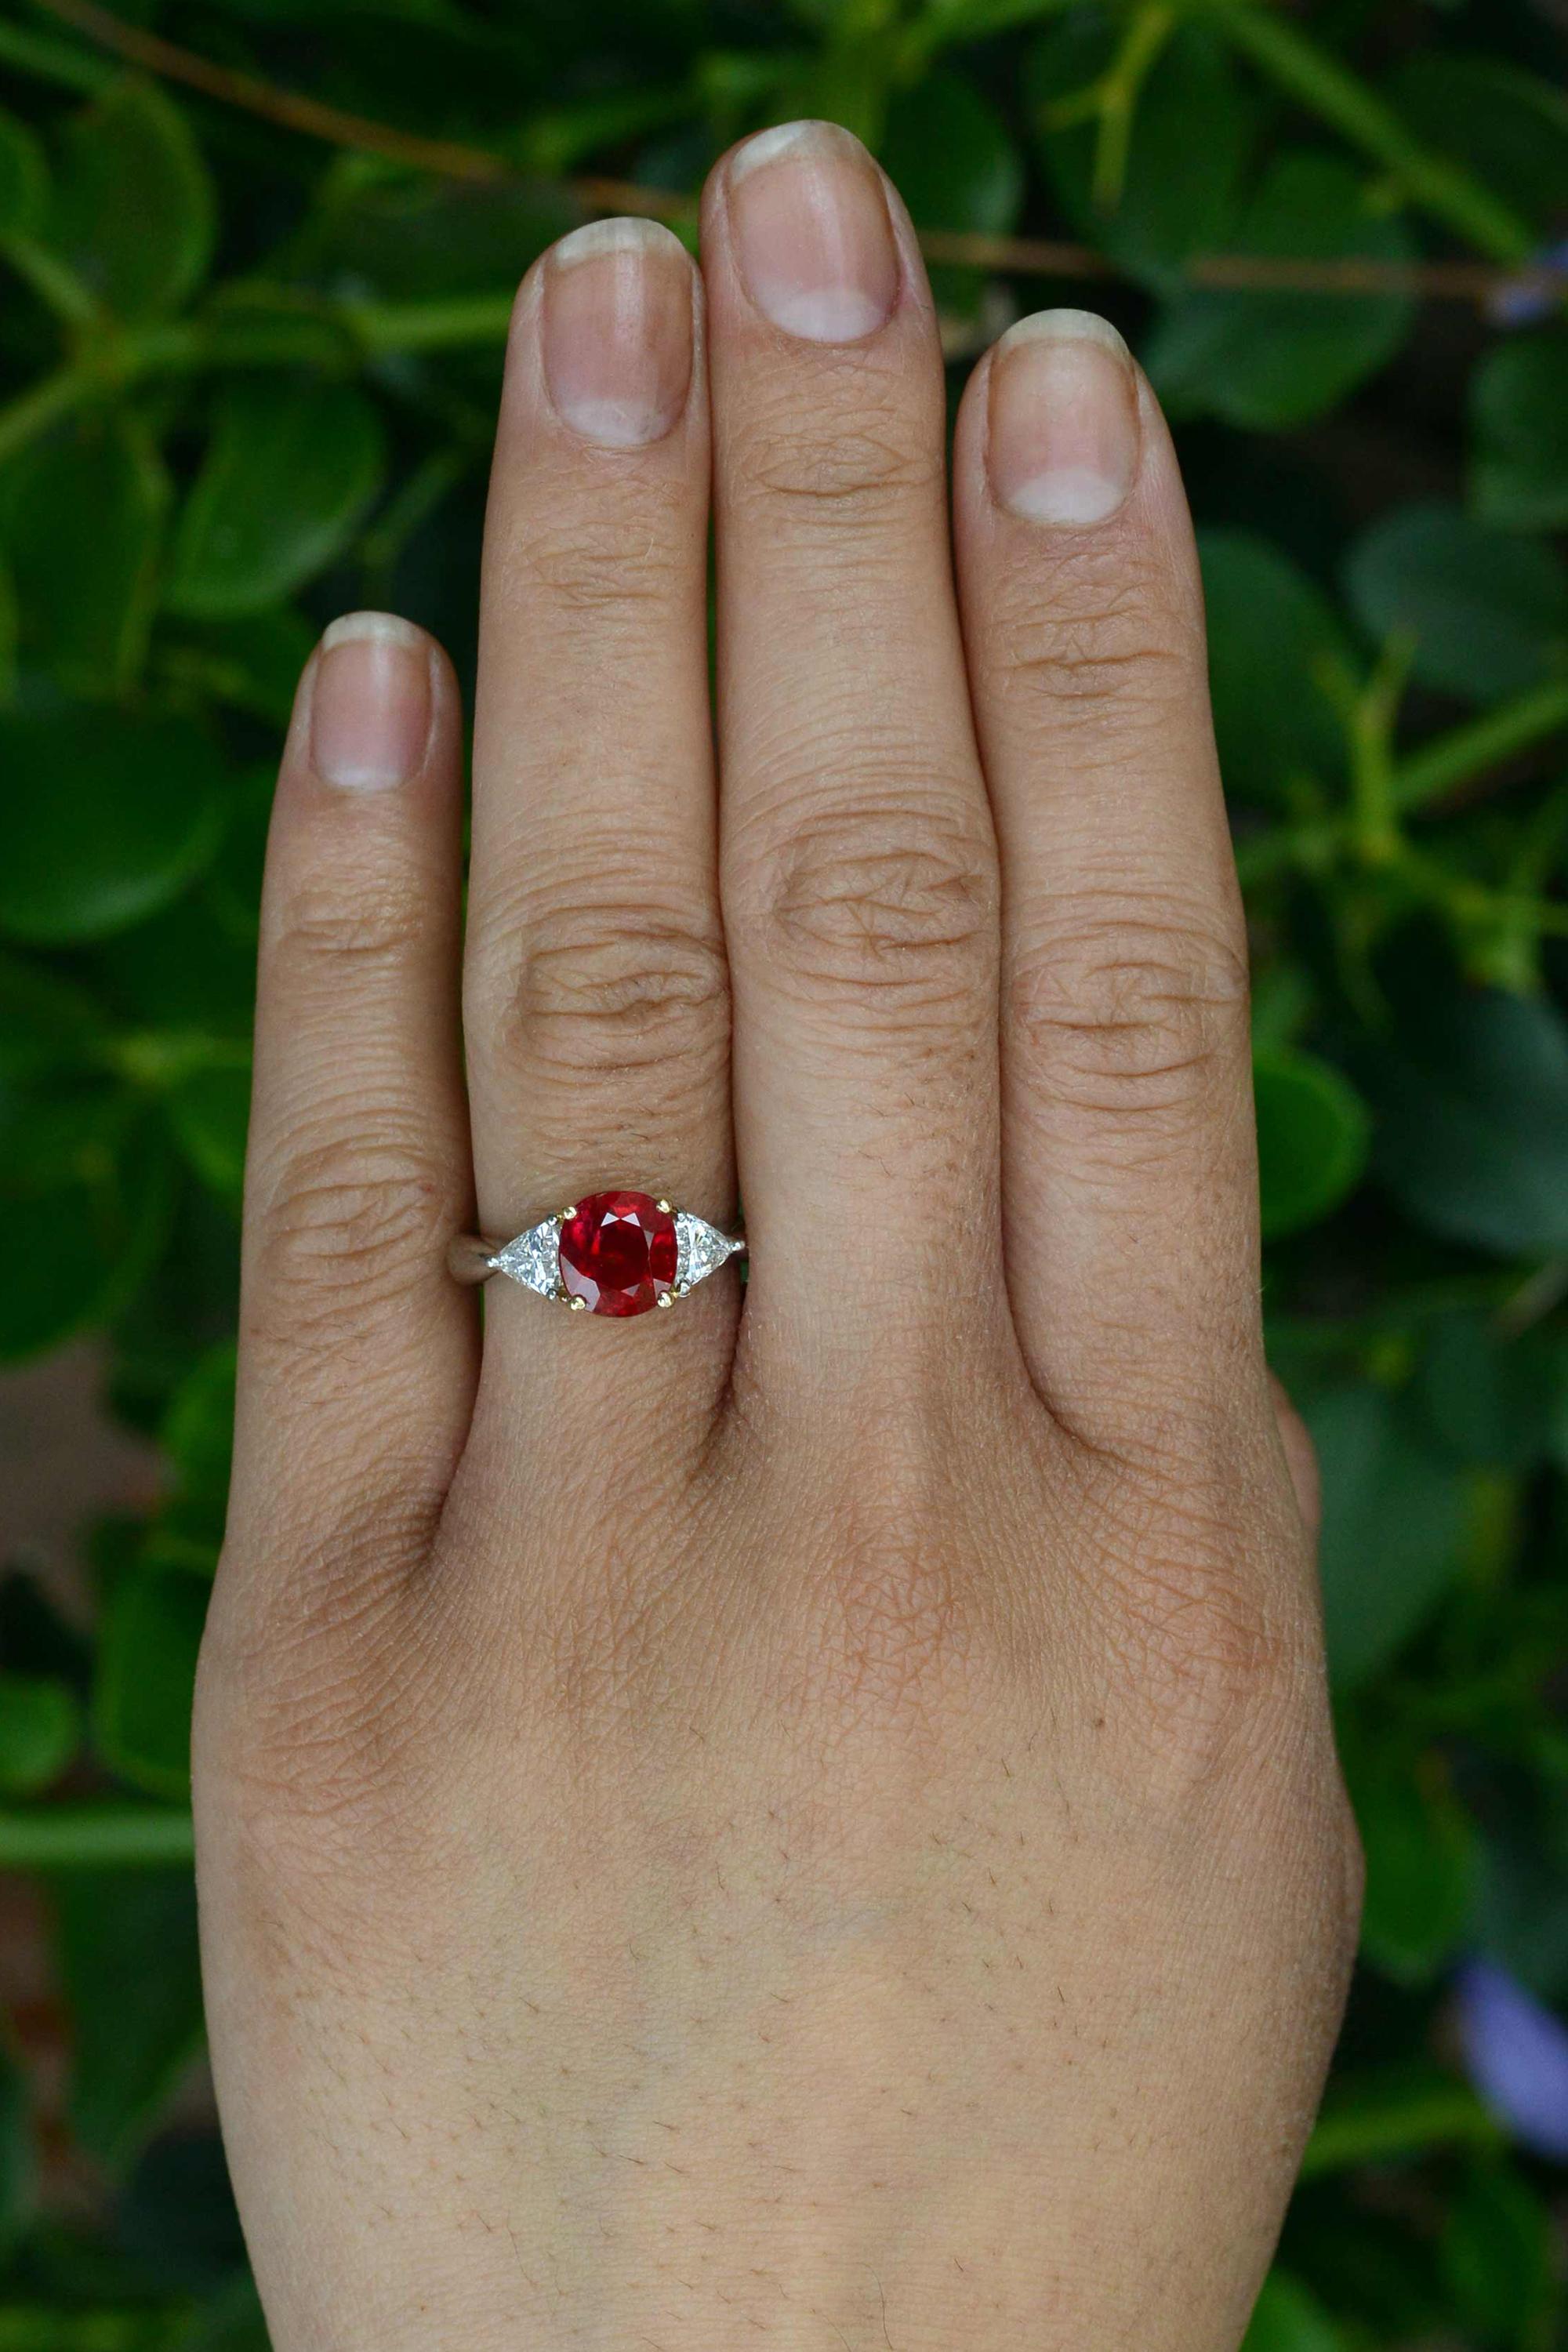 Boasting a rare, 3 carat GIA certified pigeon blood red Burma ruby commanding center stage, accompanied by a pair of fiery, sparkling triangle diamonds, this 3 stone stunner is a real show-stopper. The vivid color of Burmese rubies is prized among